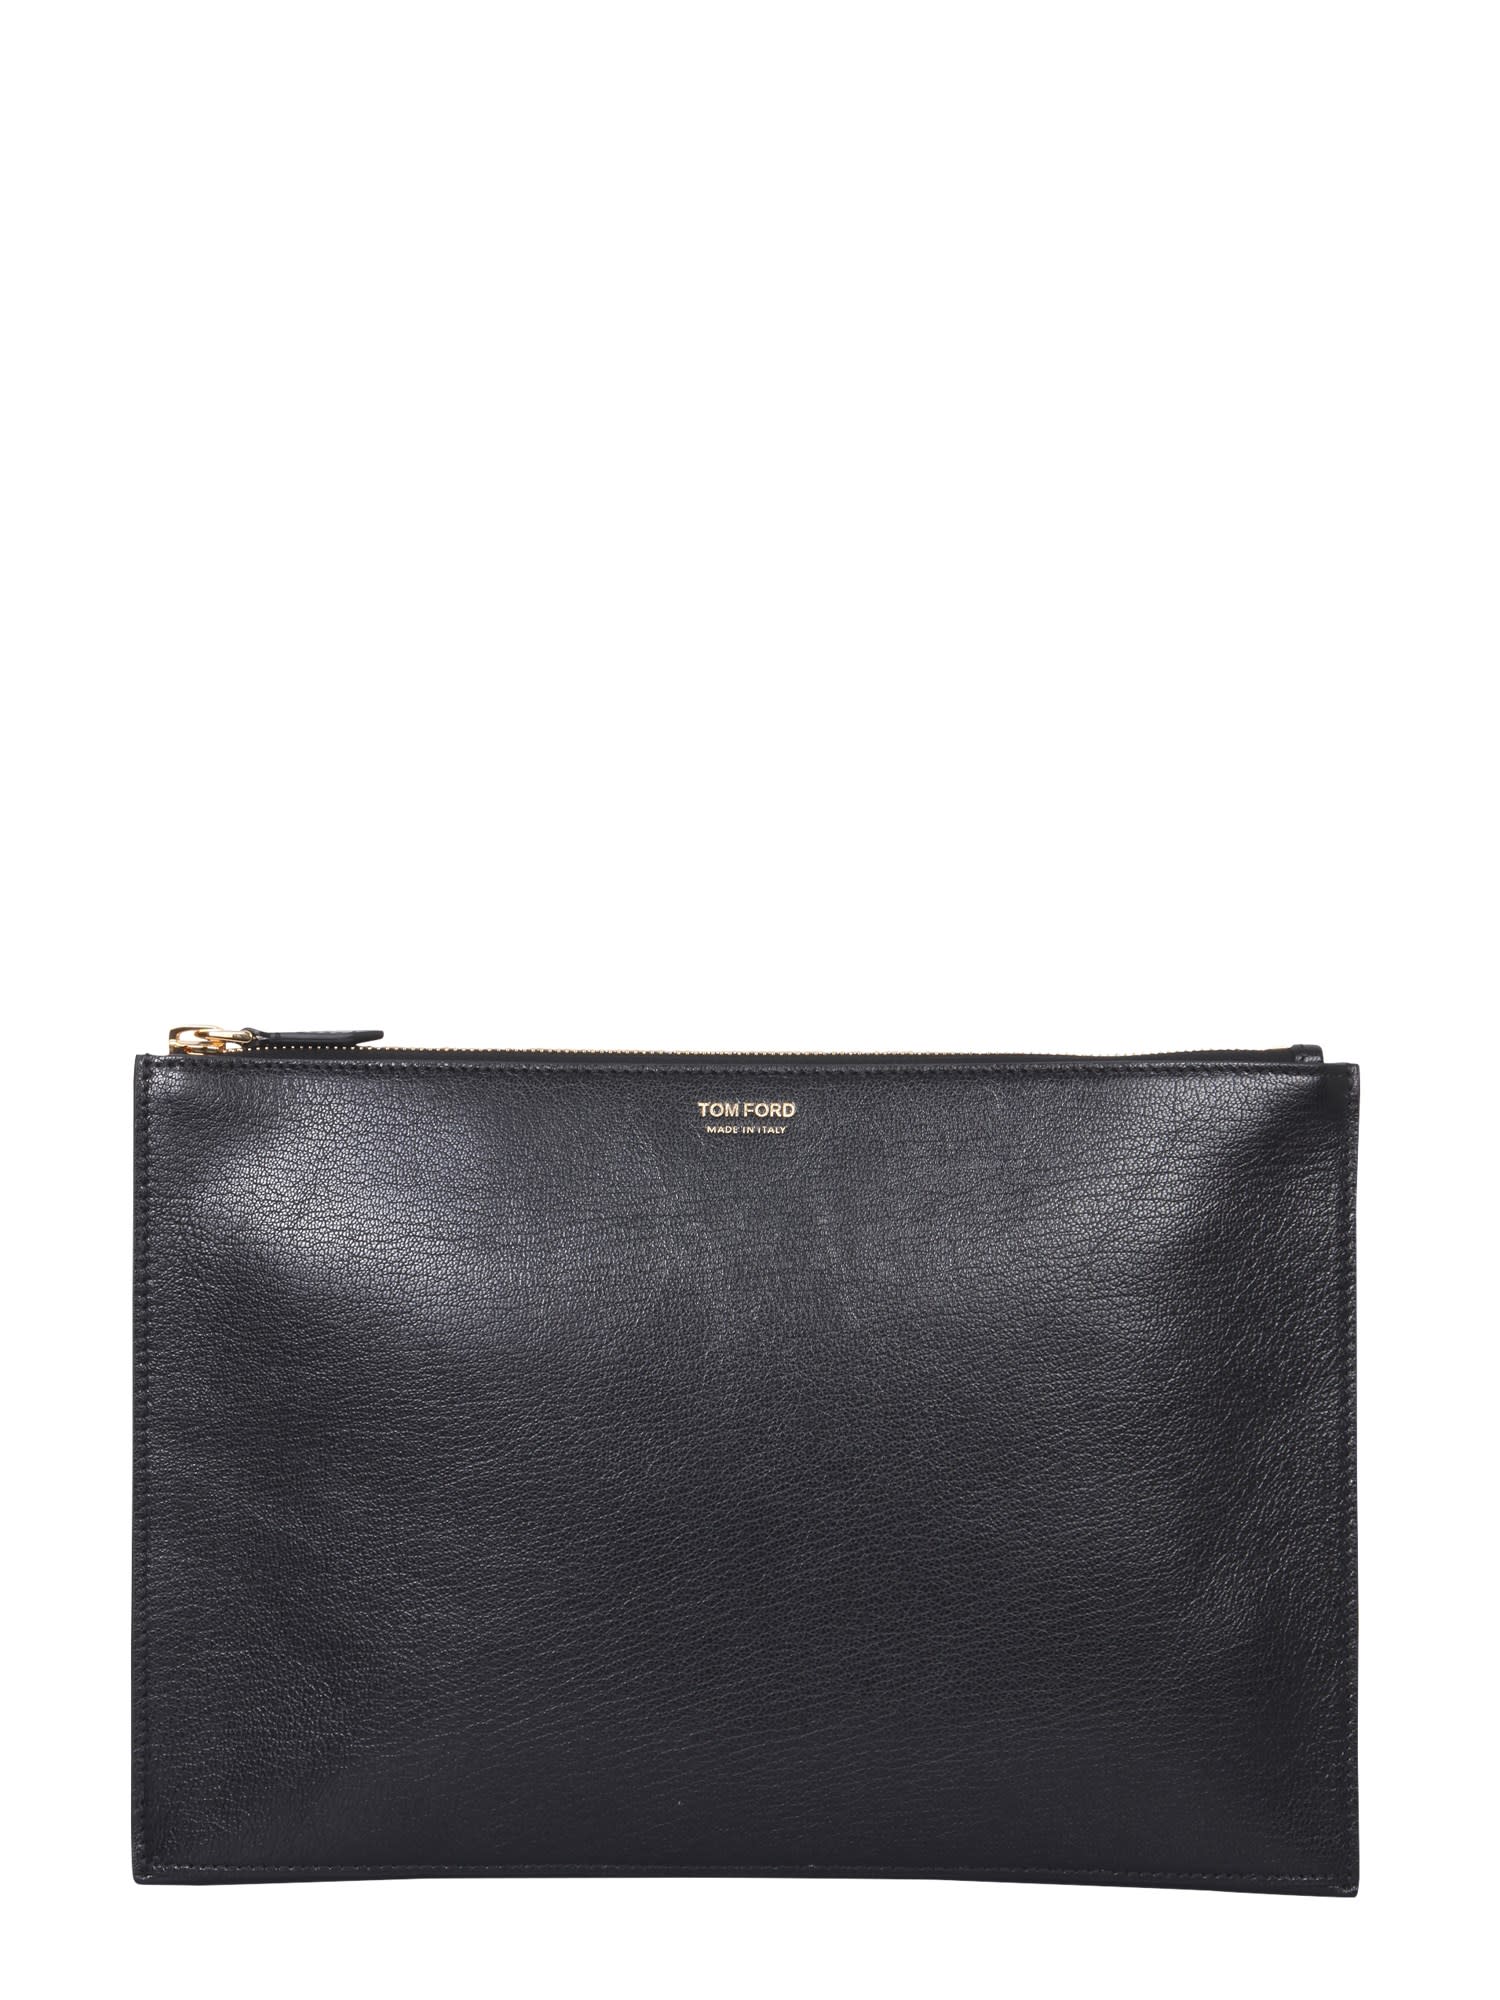 Tom Ford Flat Leather Pouch